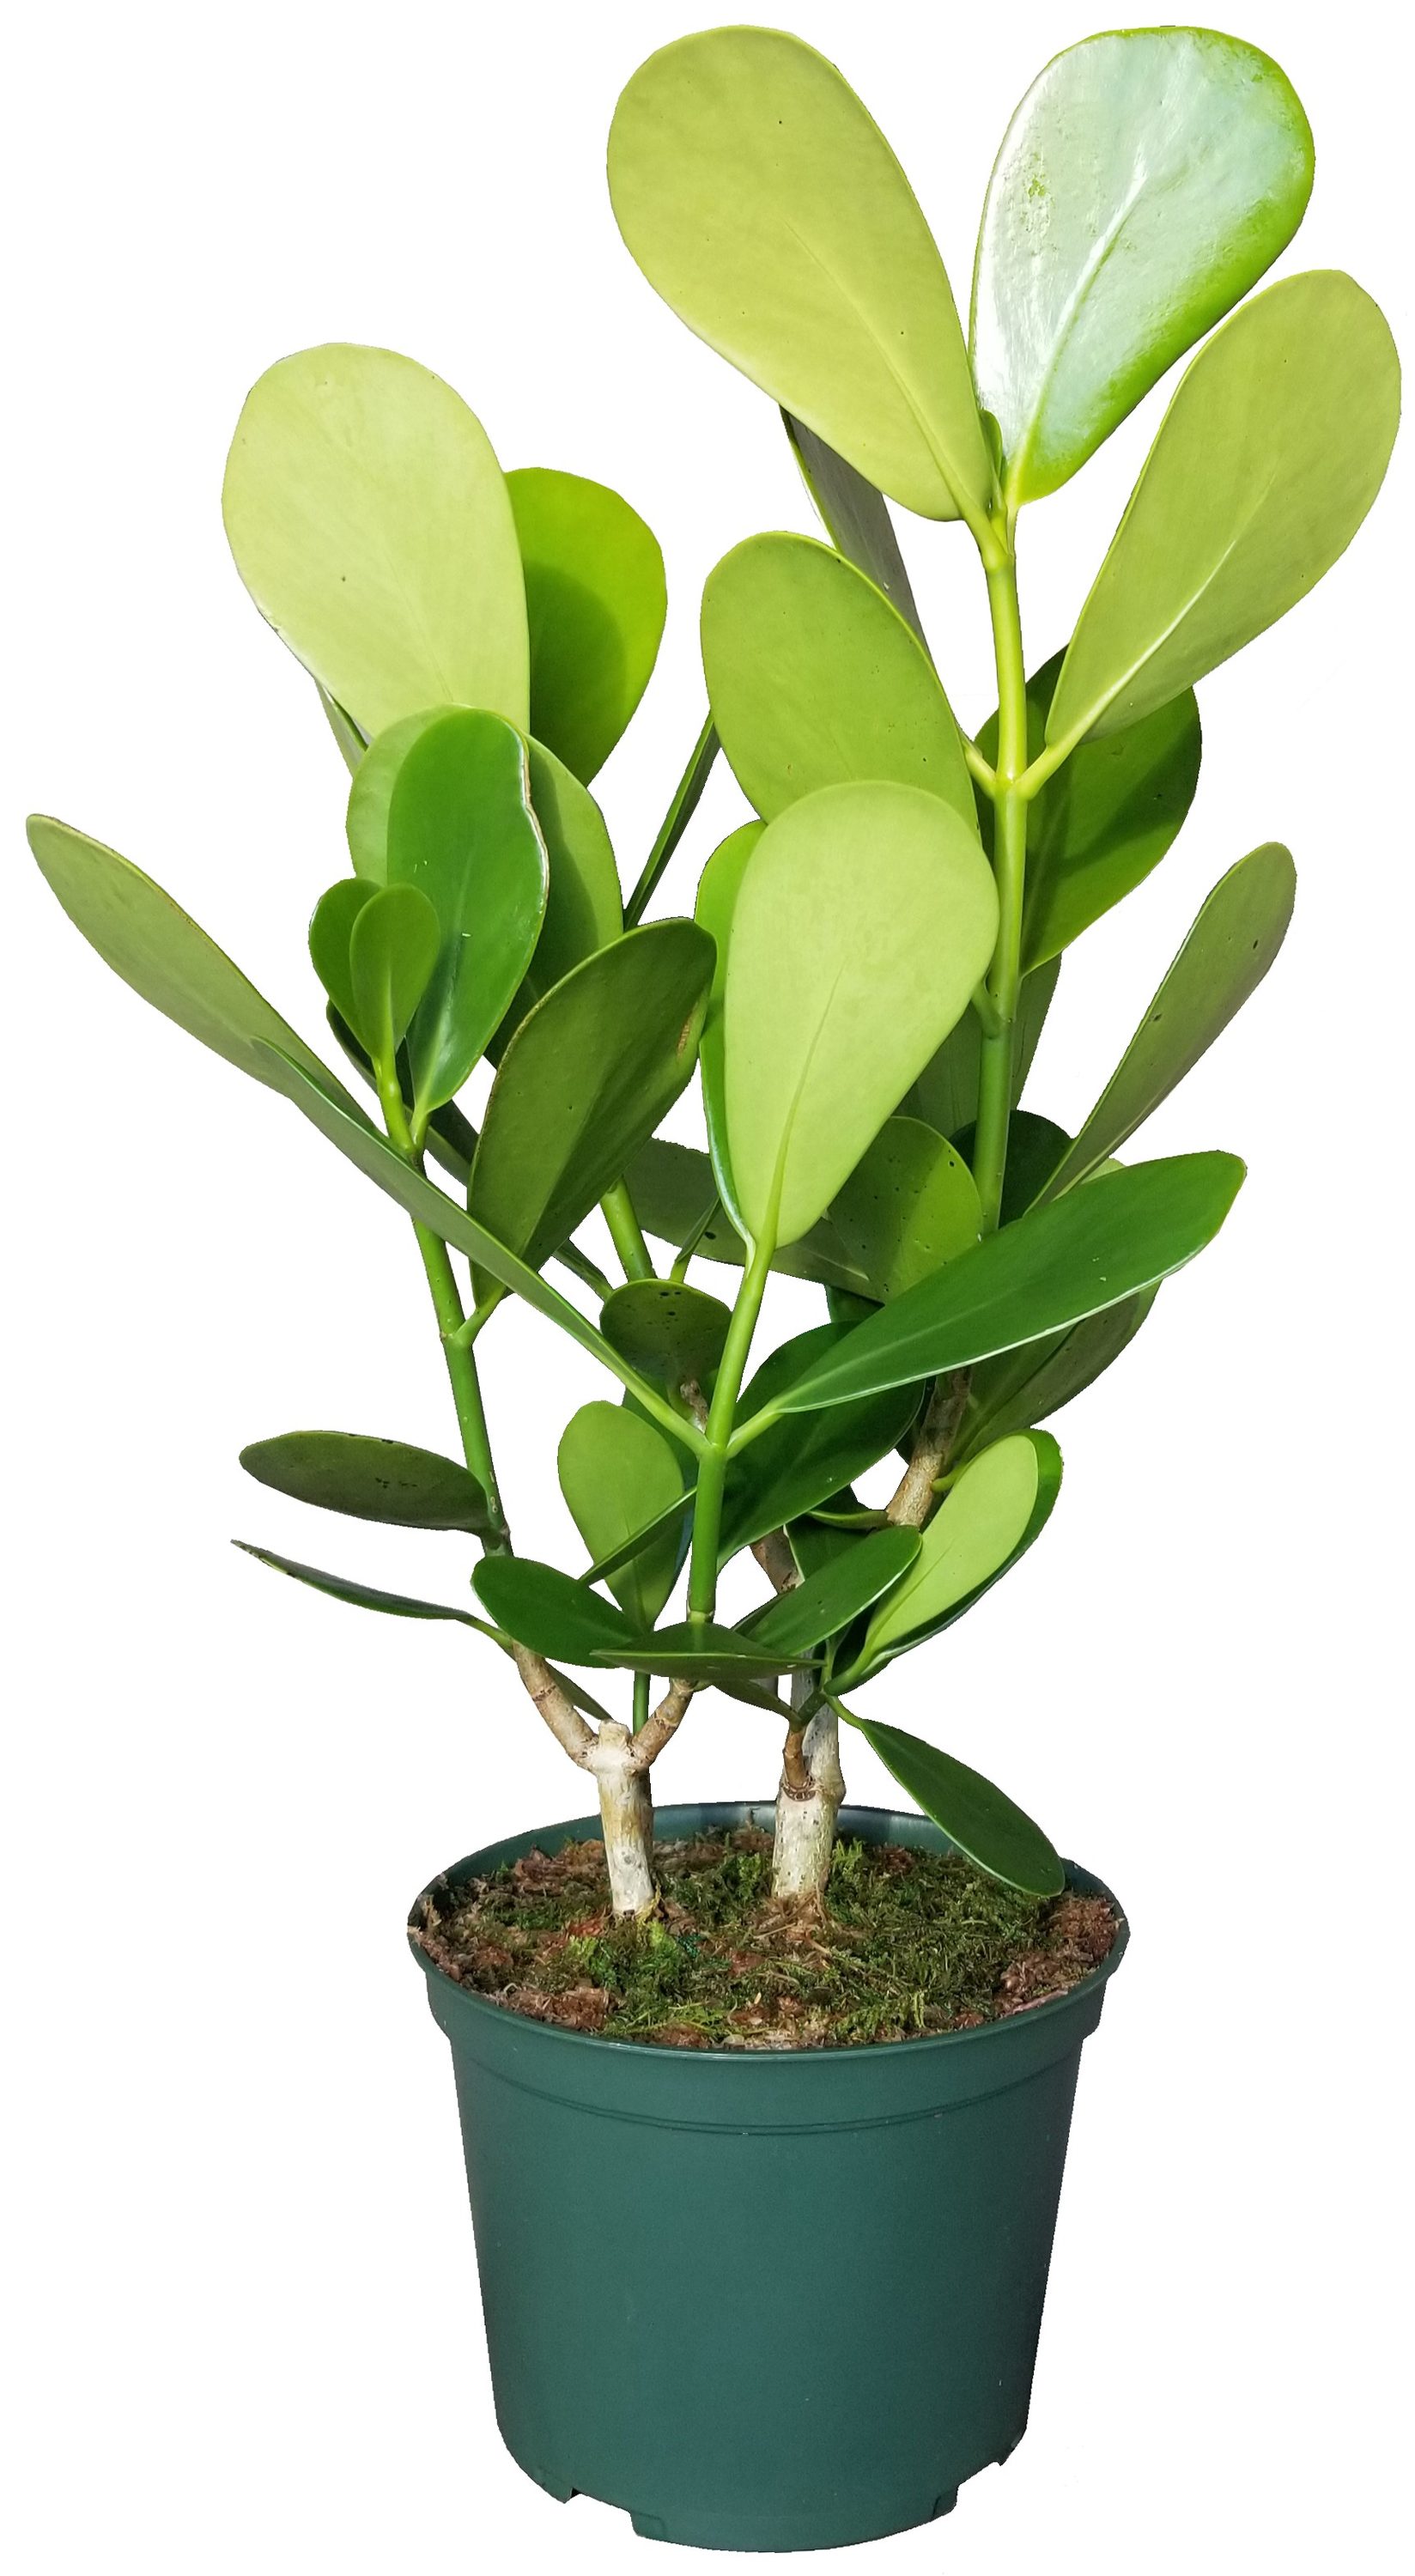 Autograph House Plant in 6-in Pot at Lowes.com